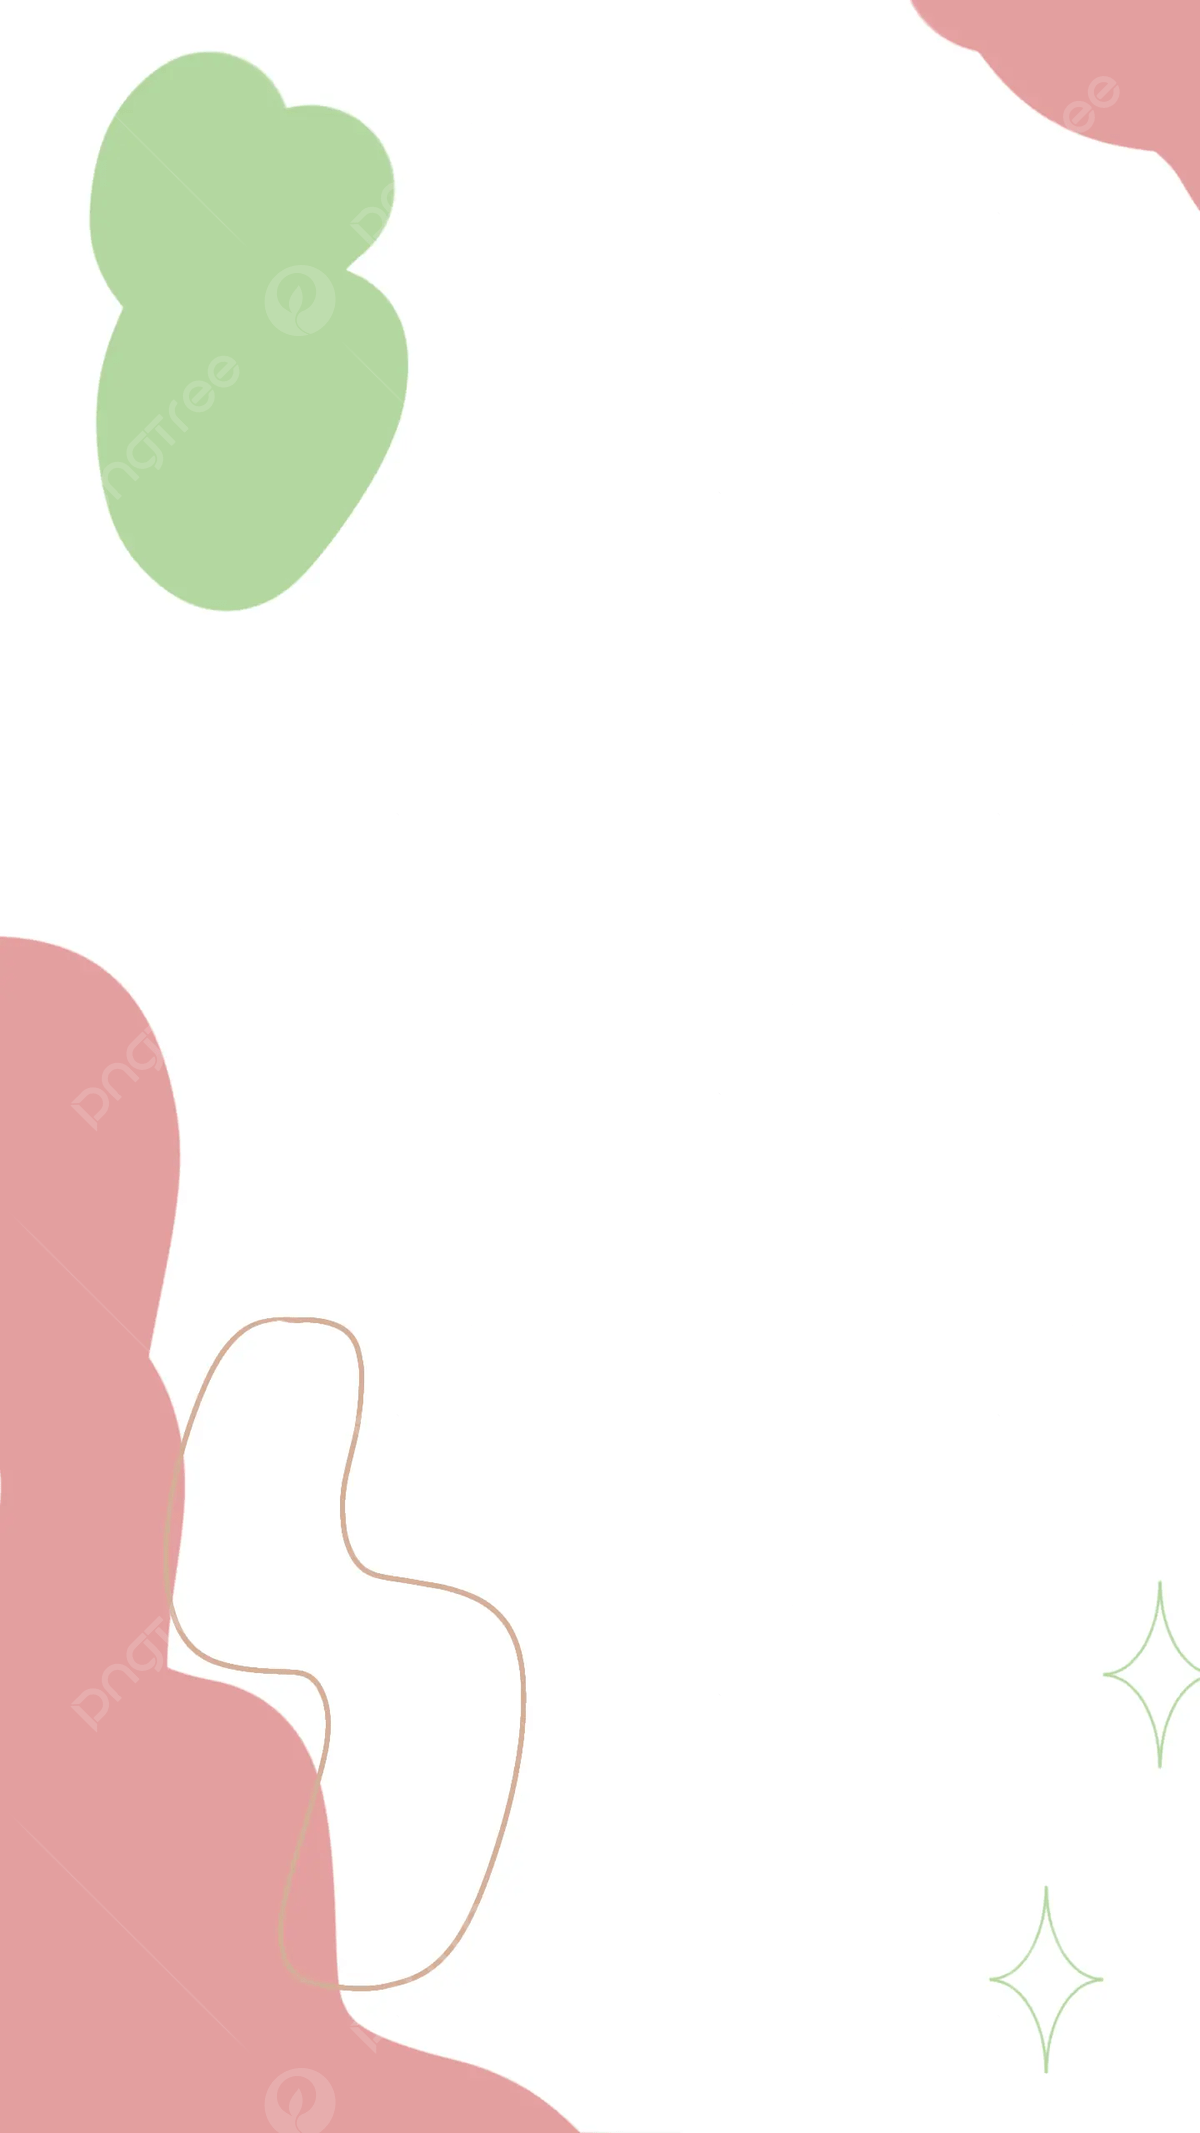 A white background with green and pink shapes - Border